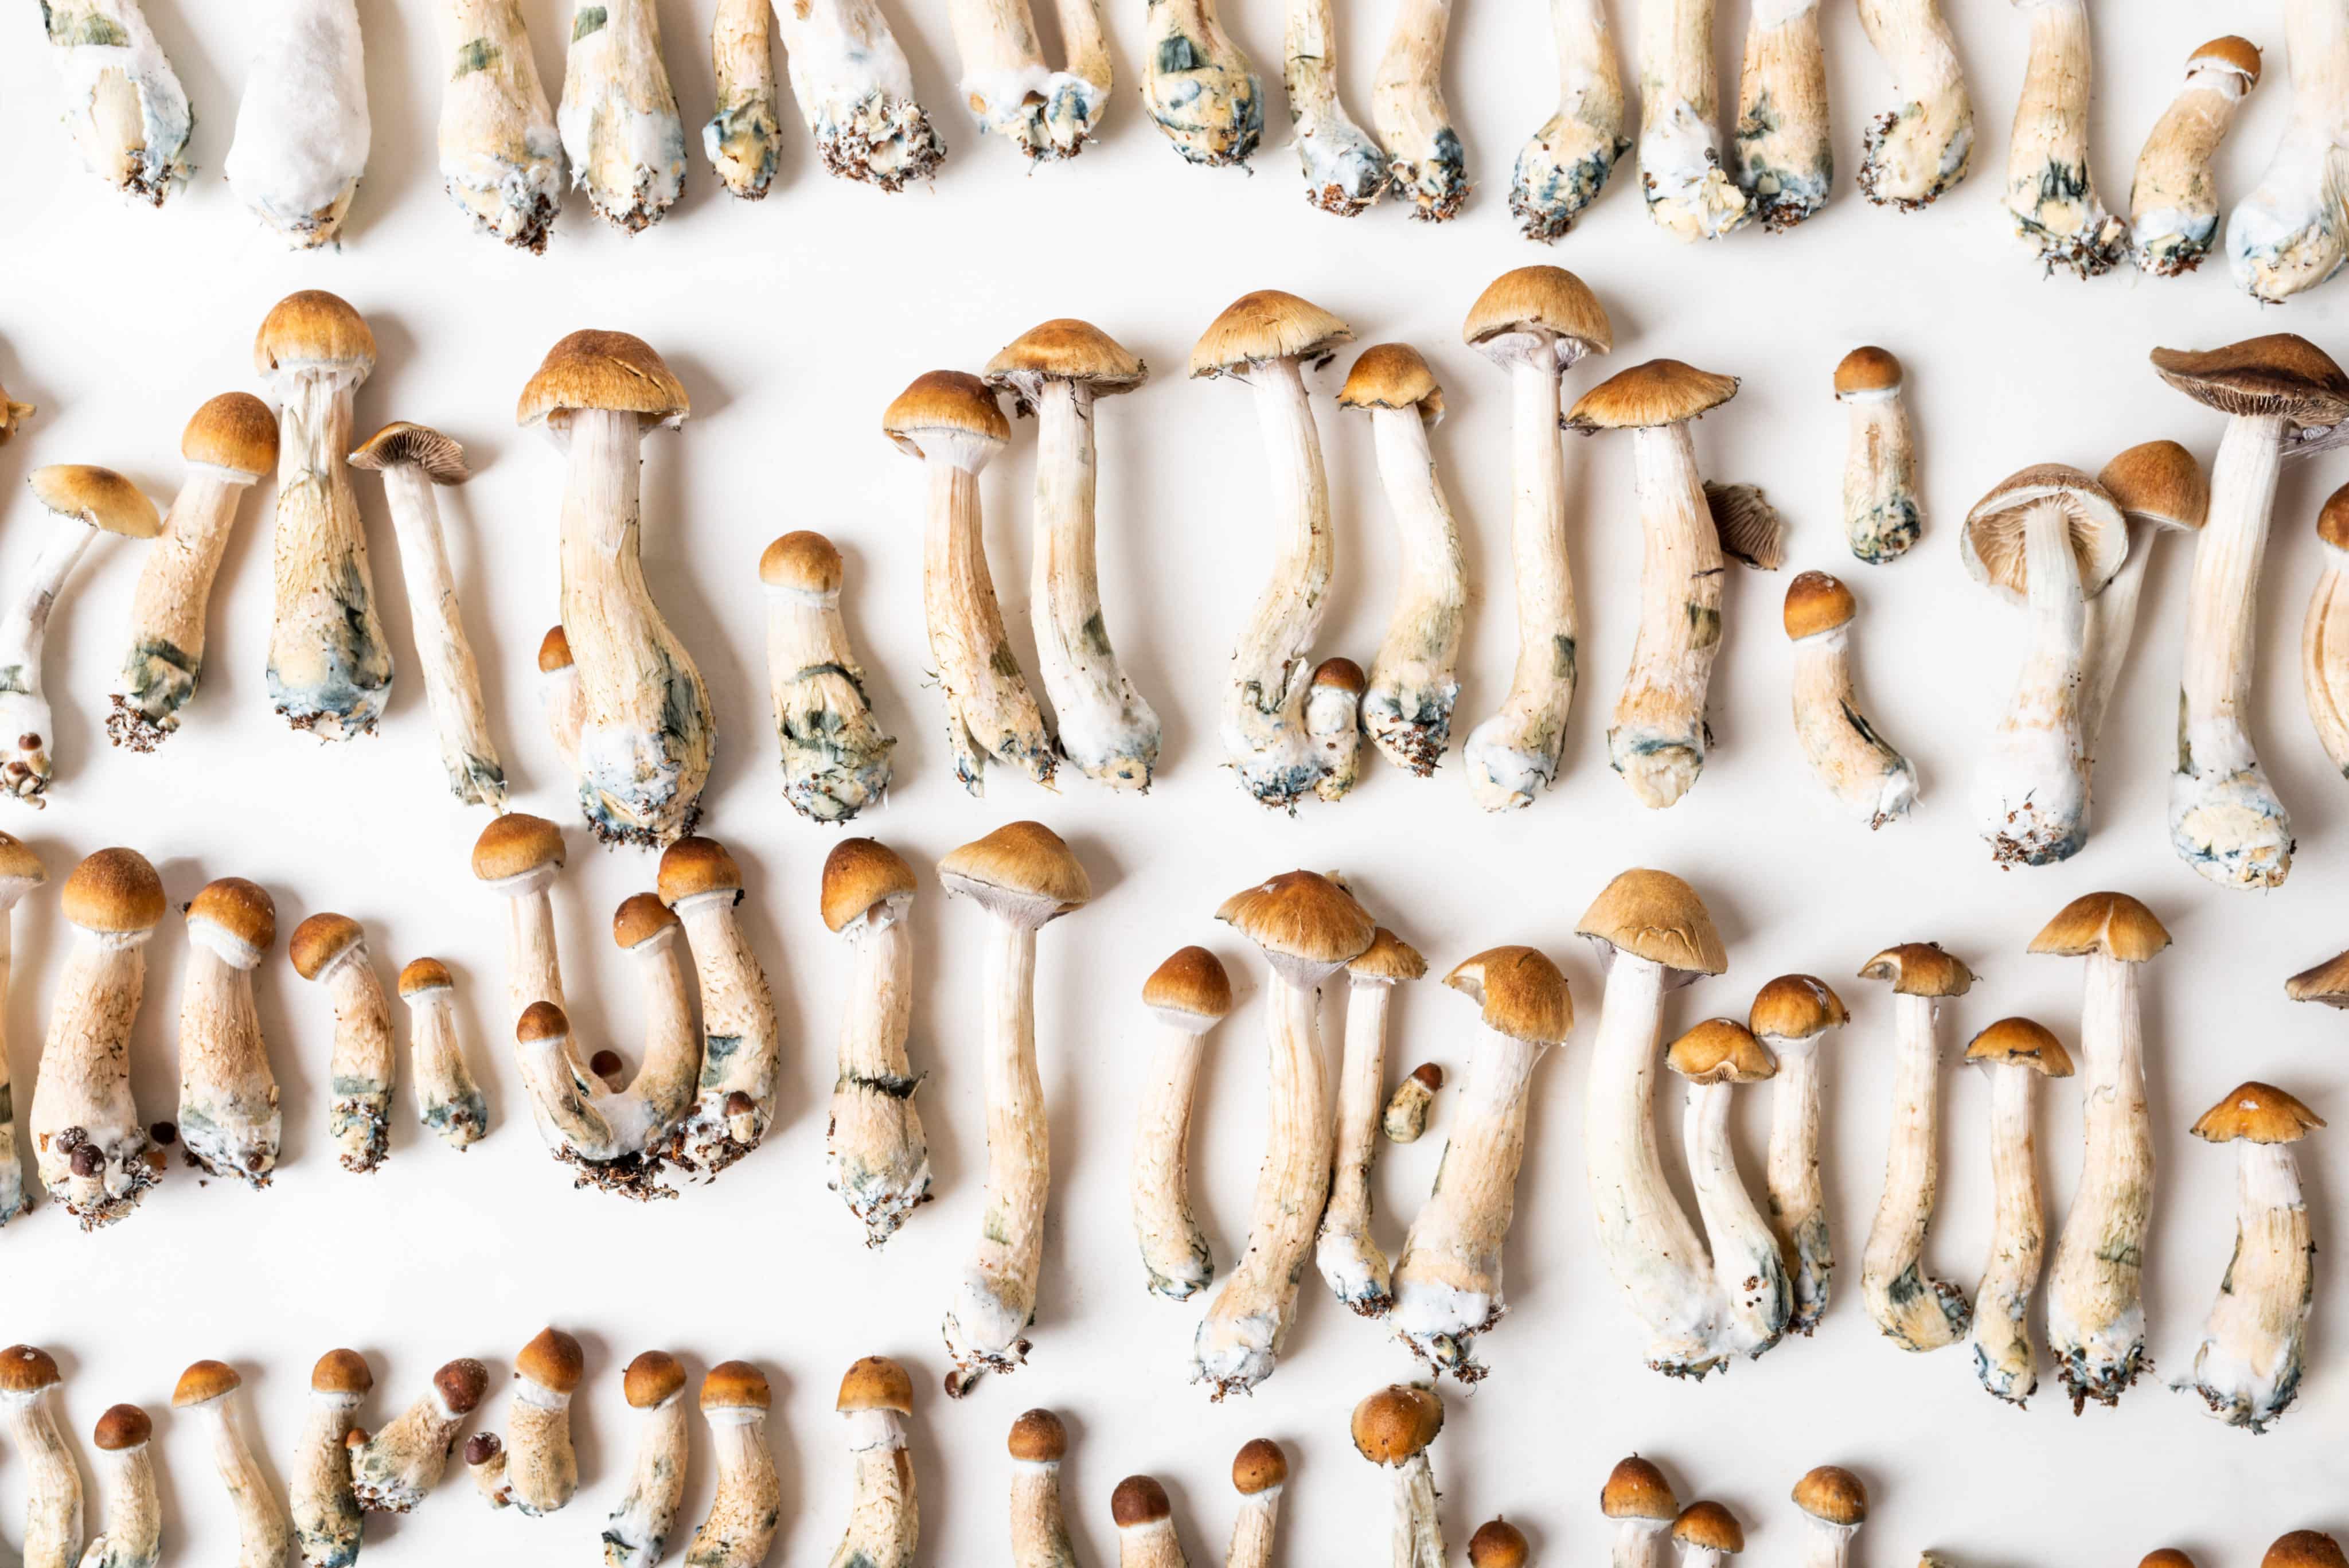 Oregon Psilocybin Rules Set To Be Finalized in December